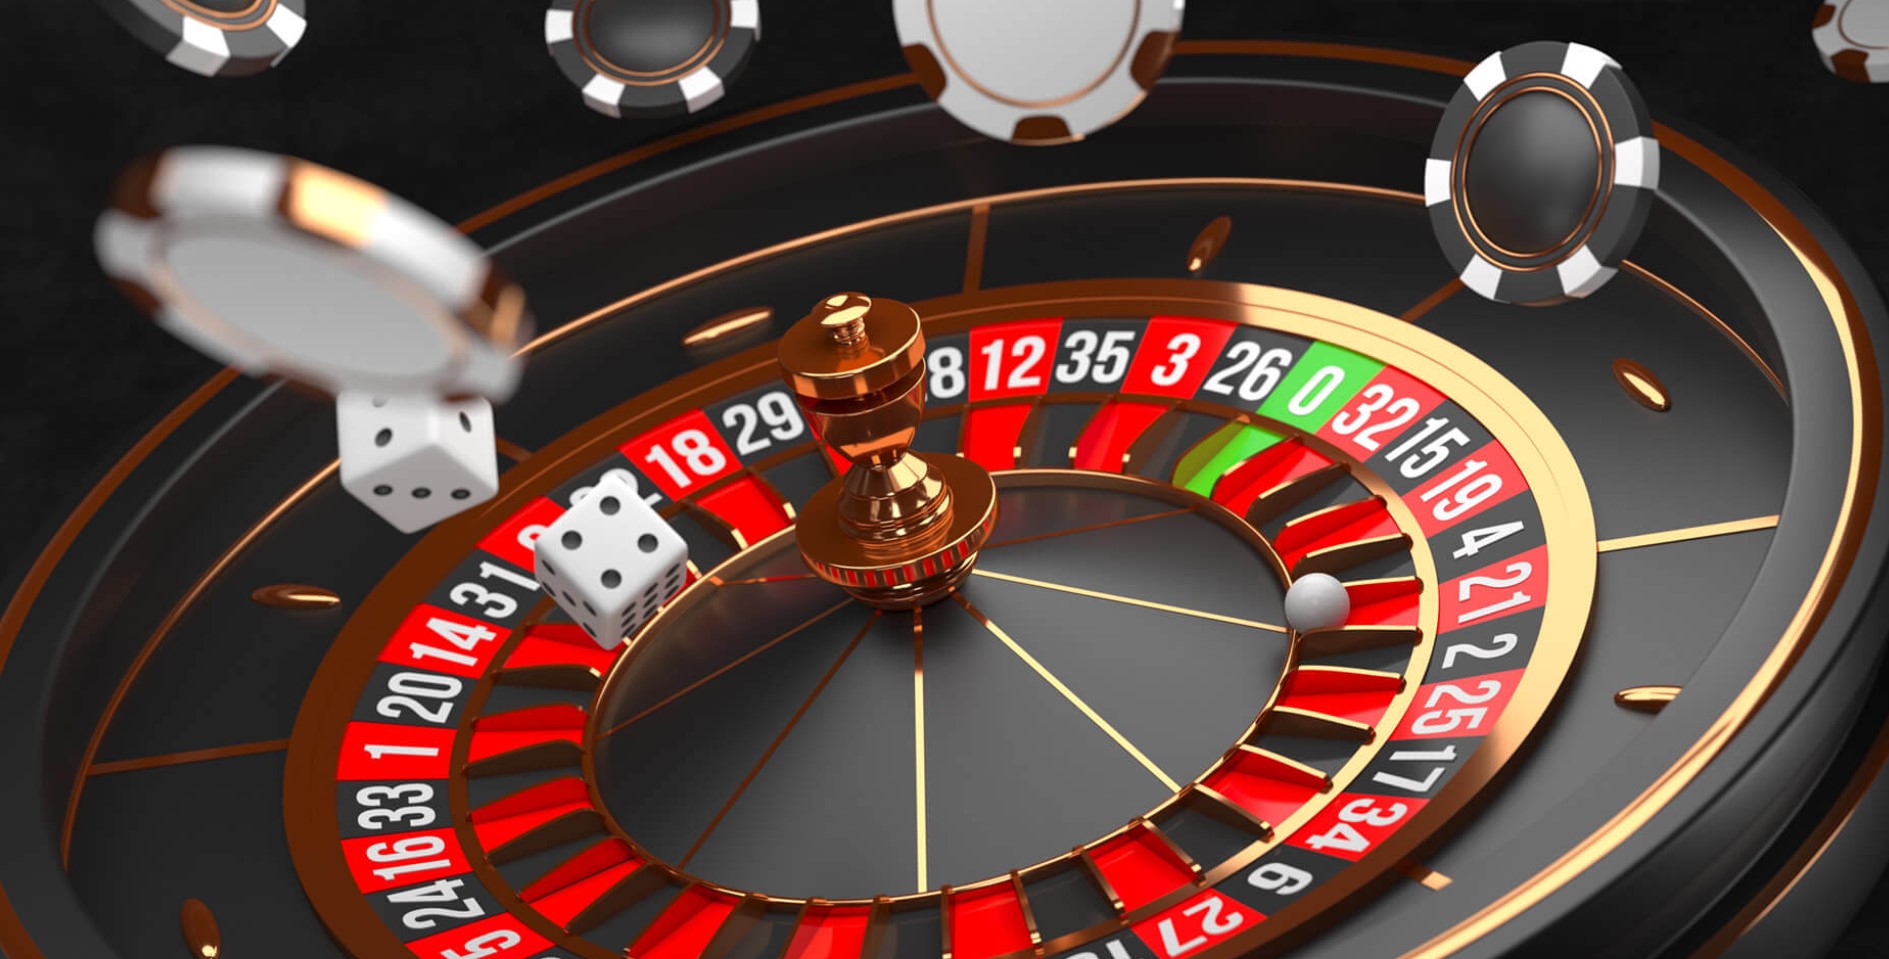 What mistakes players often make when playing roulette, and how to avoid them